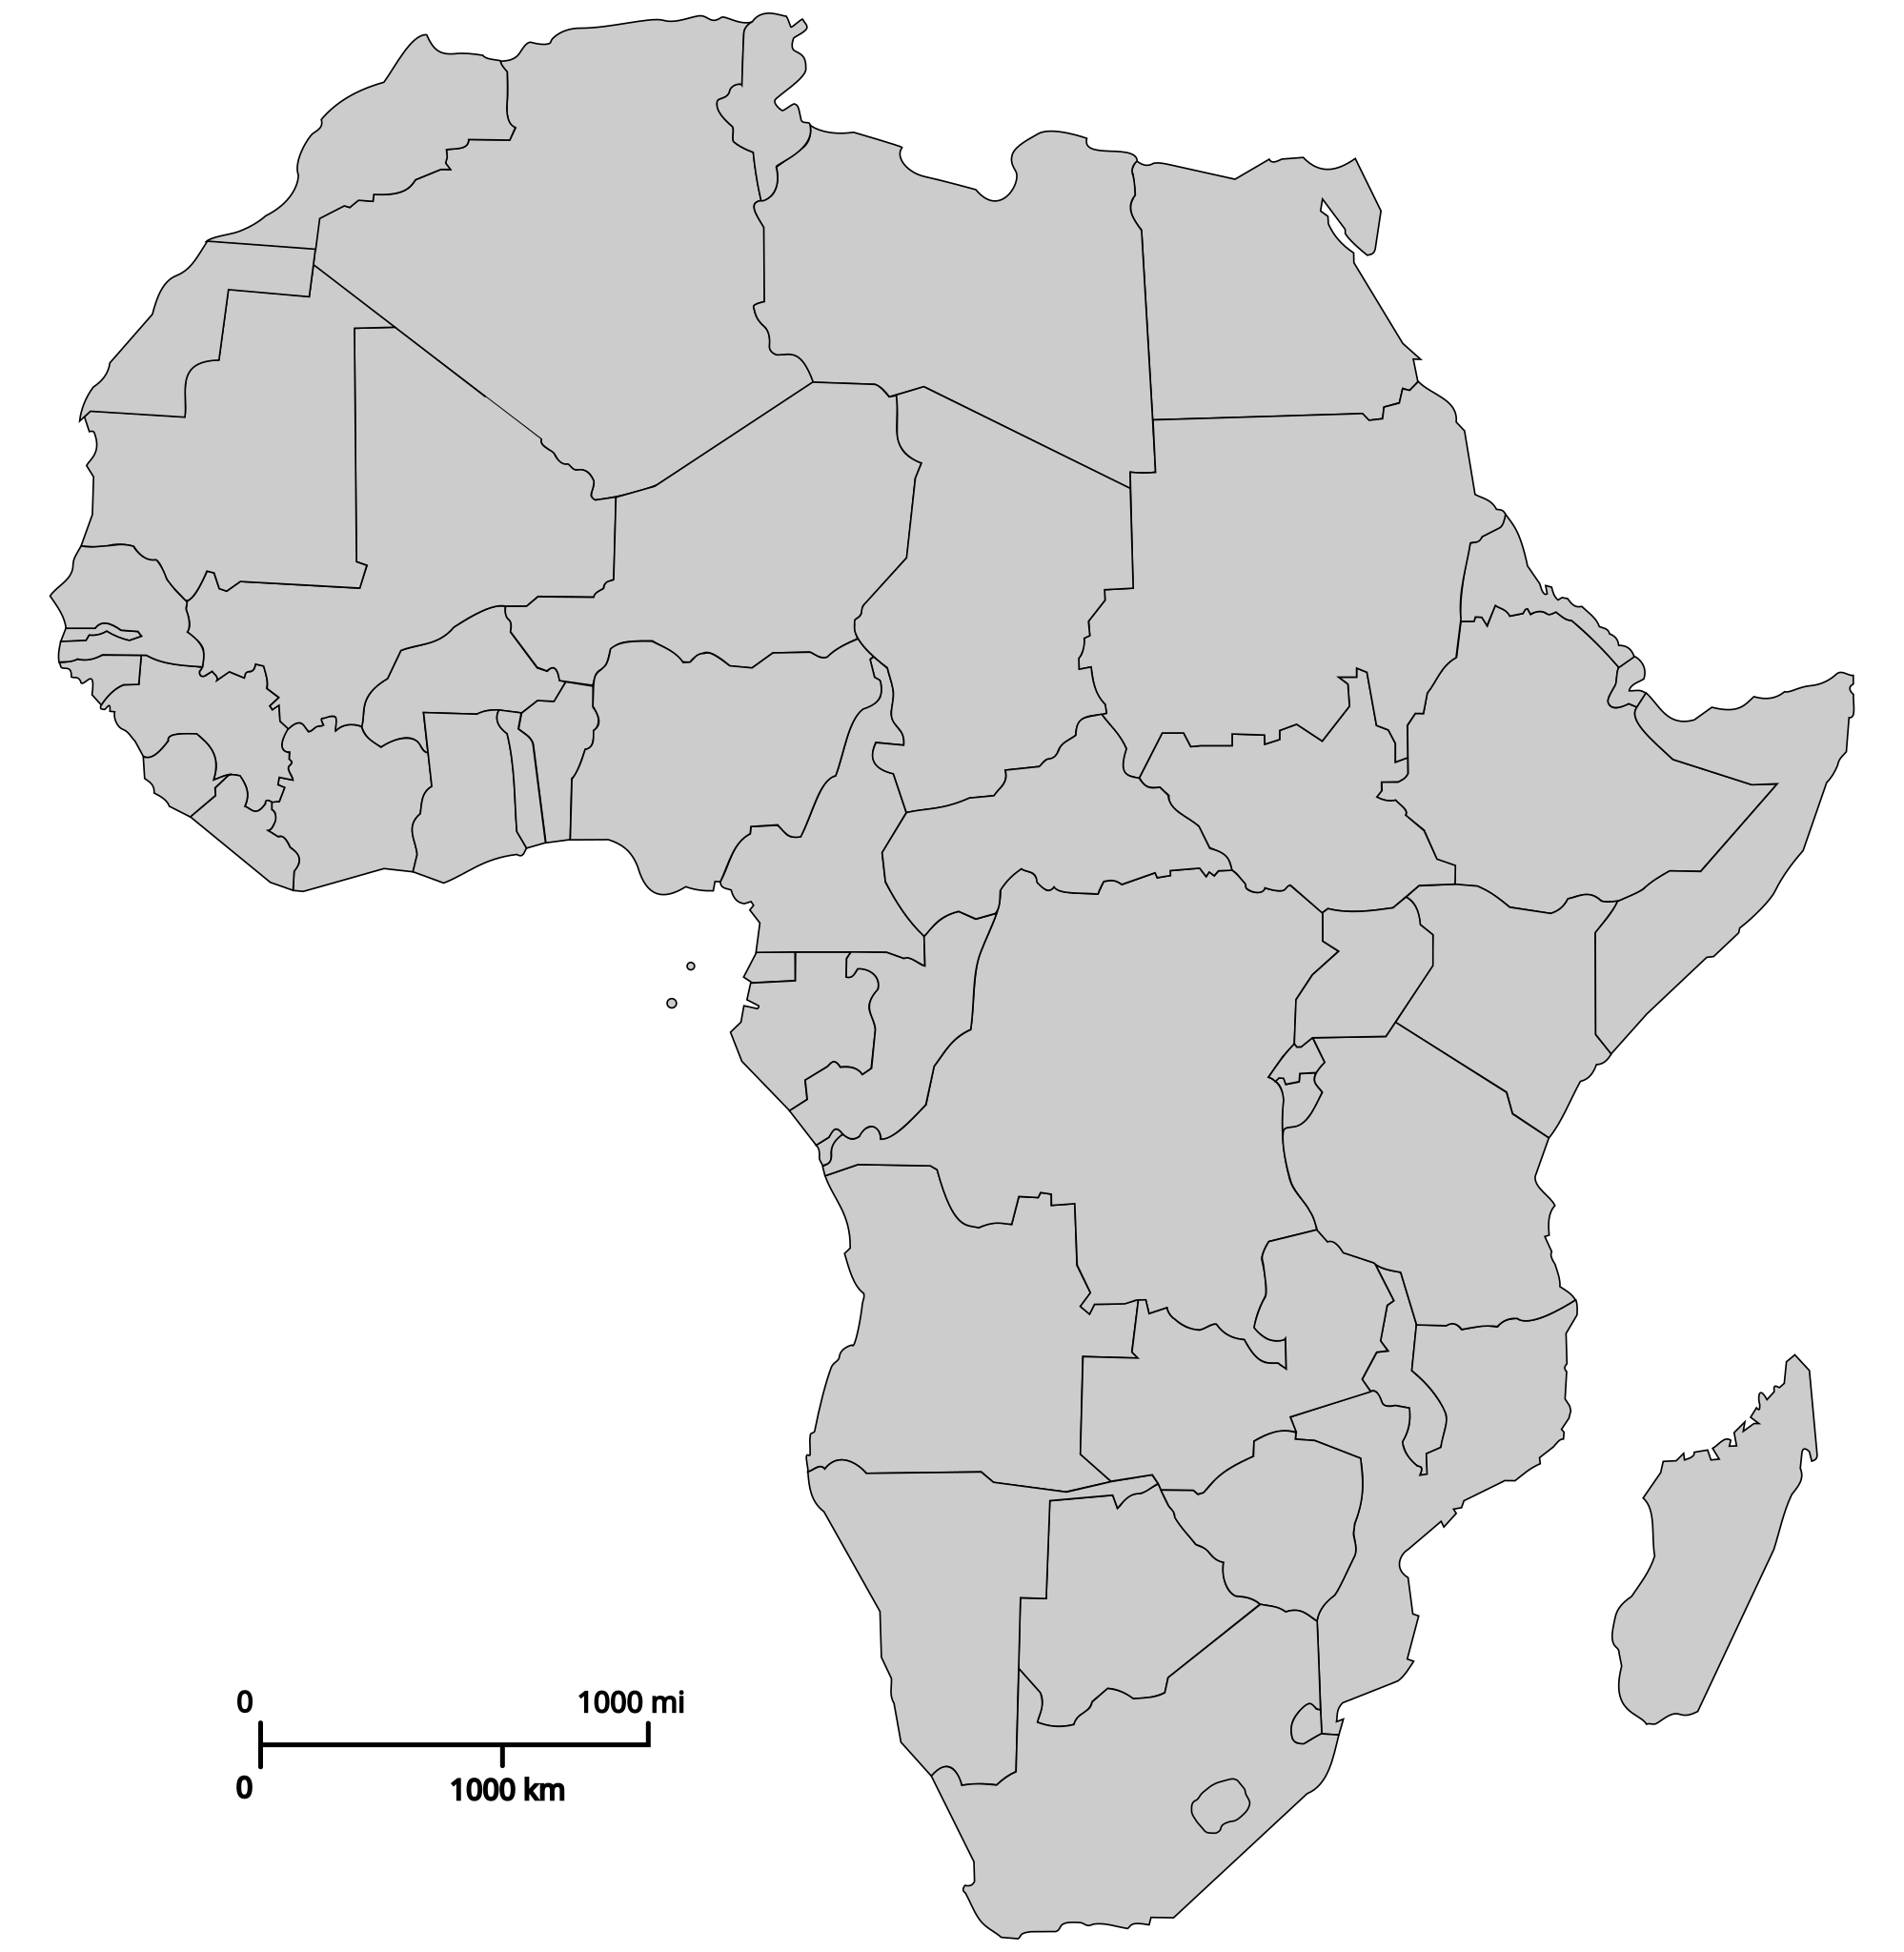 africa map countries black and white